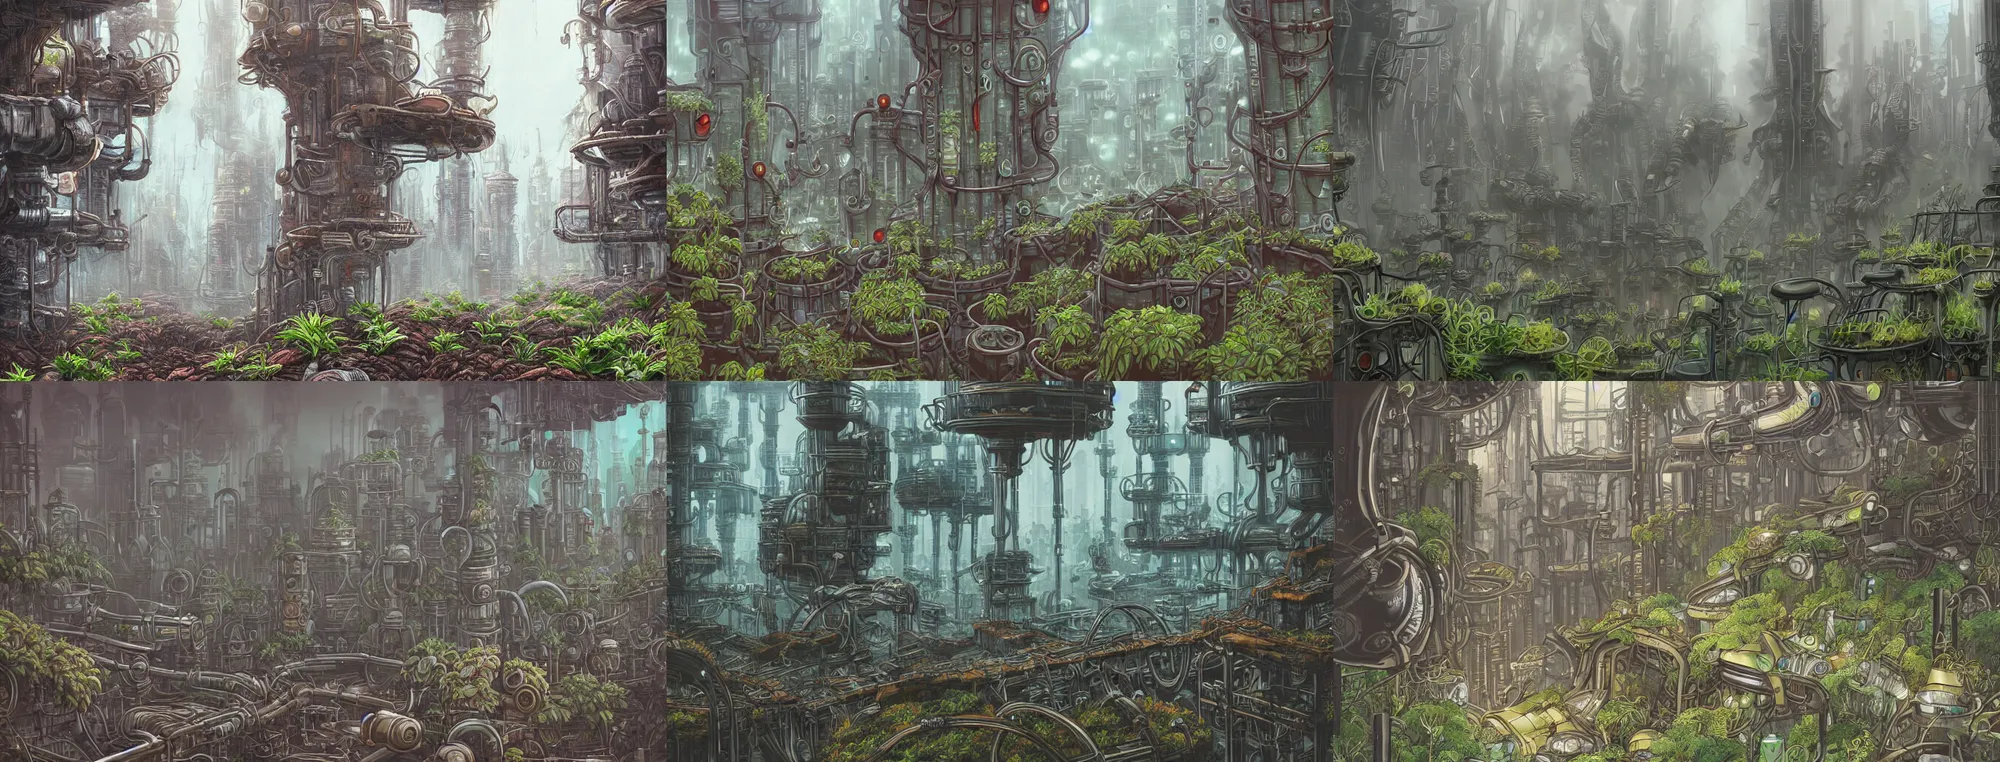 Prompt: plants growing out of old rusty pipes in a futuristic city, ground covored in mist, detailed steampunk illustration